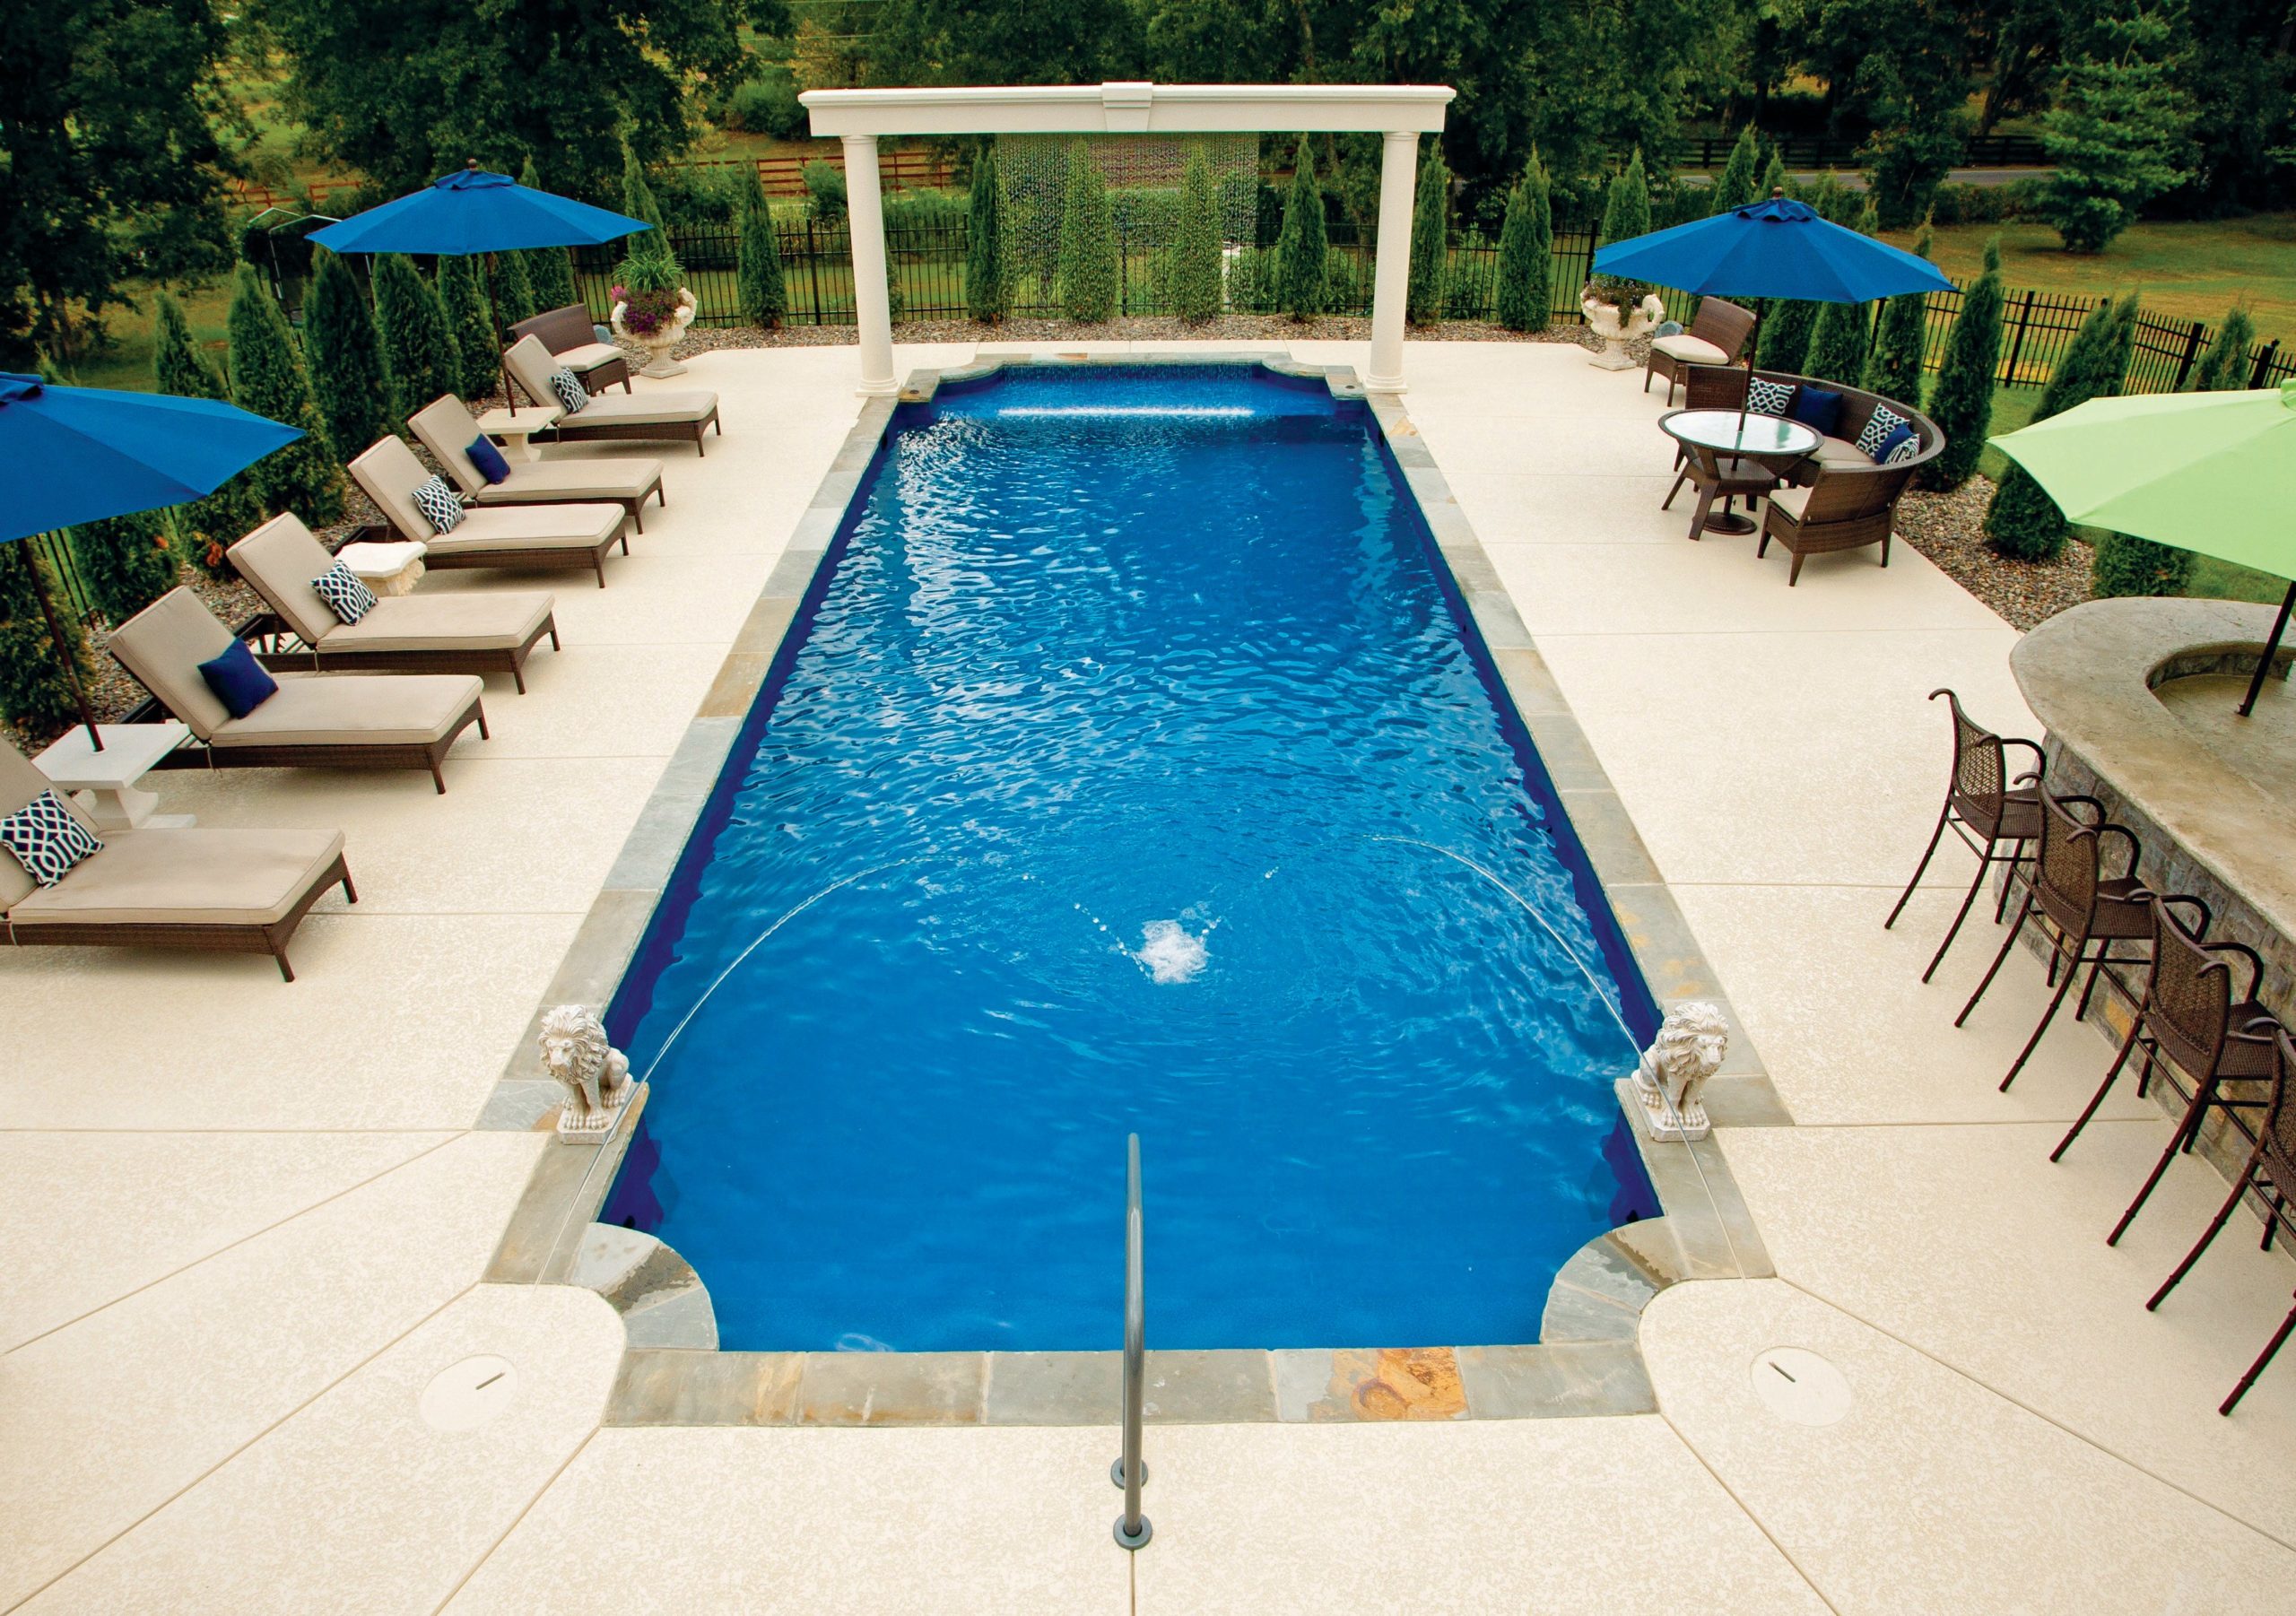 common swimming pool Q&A from Latham Pools - long rectangular pool